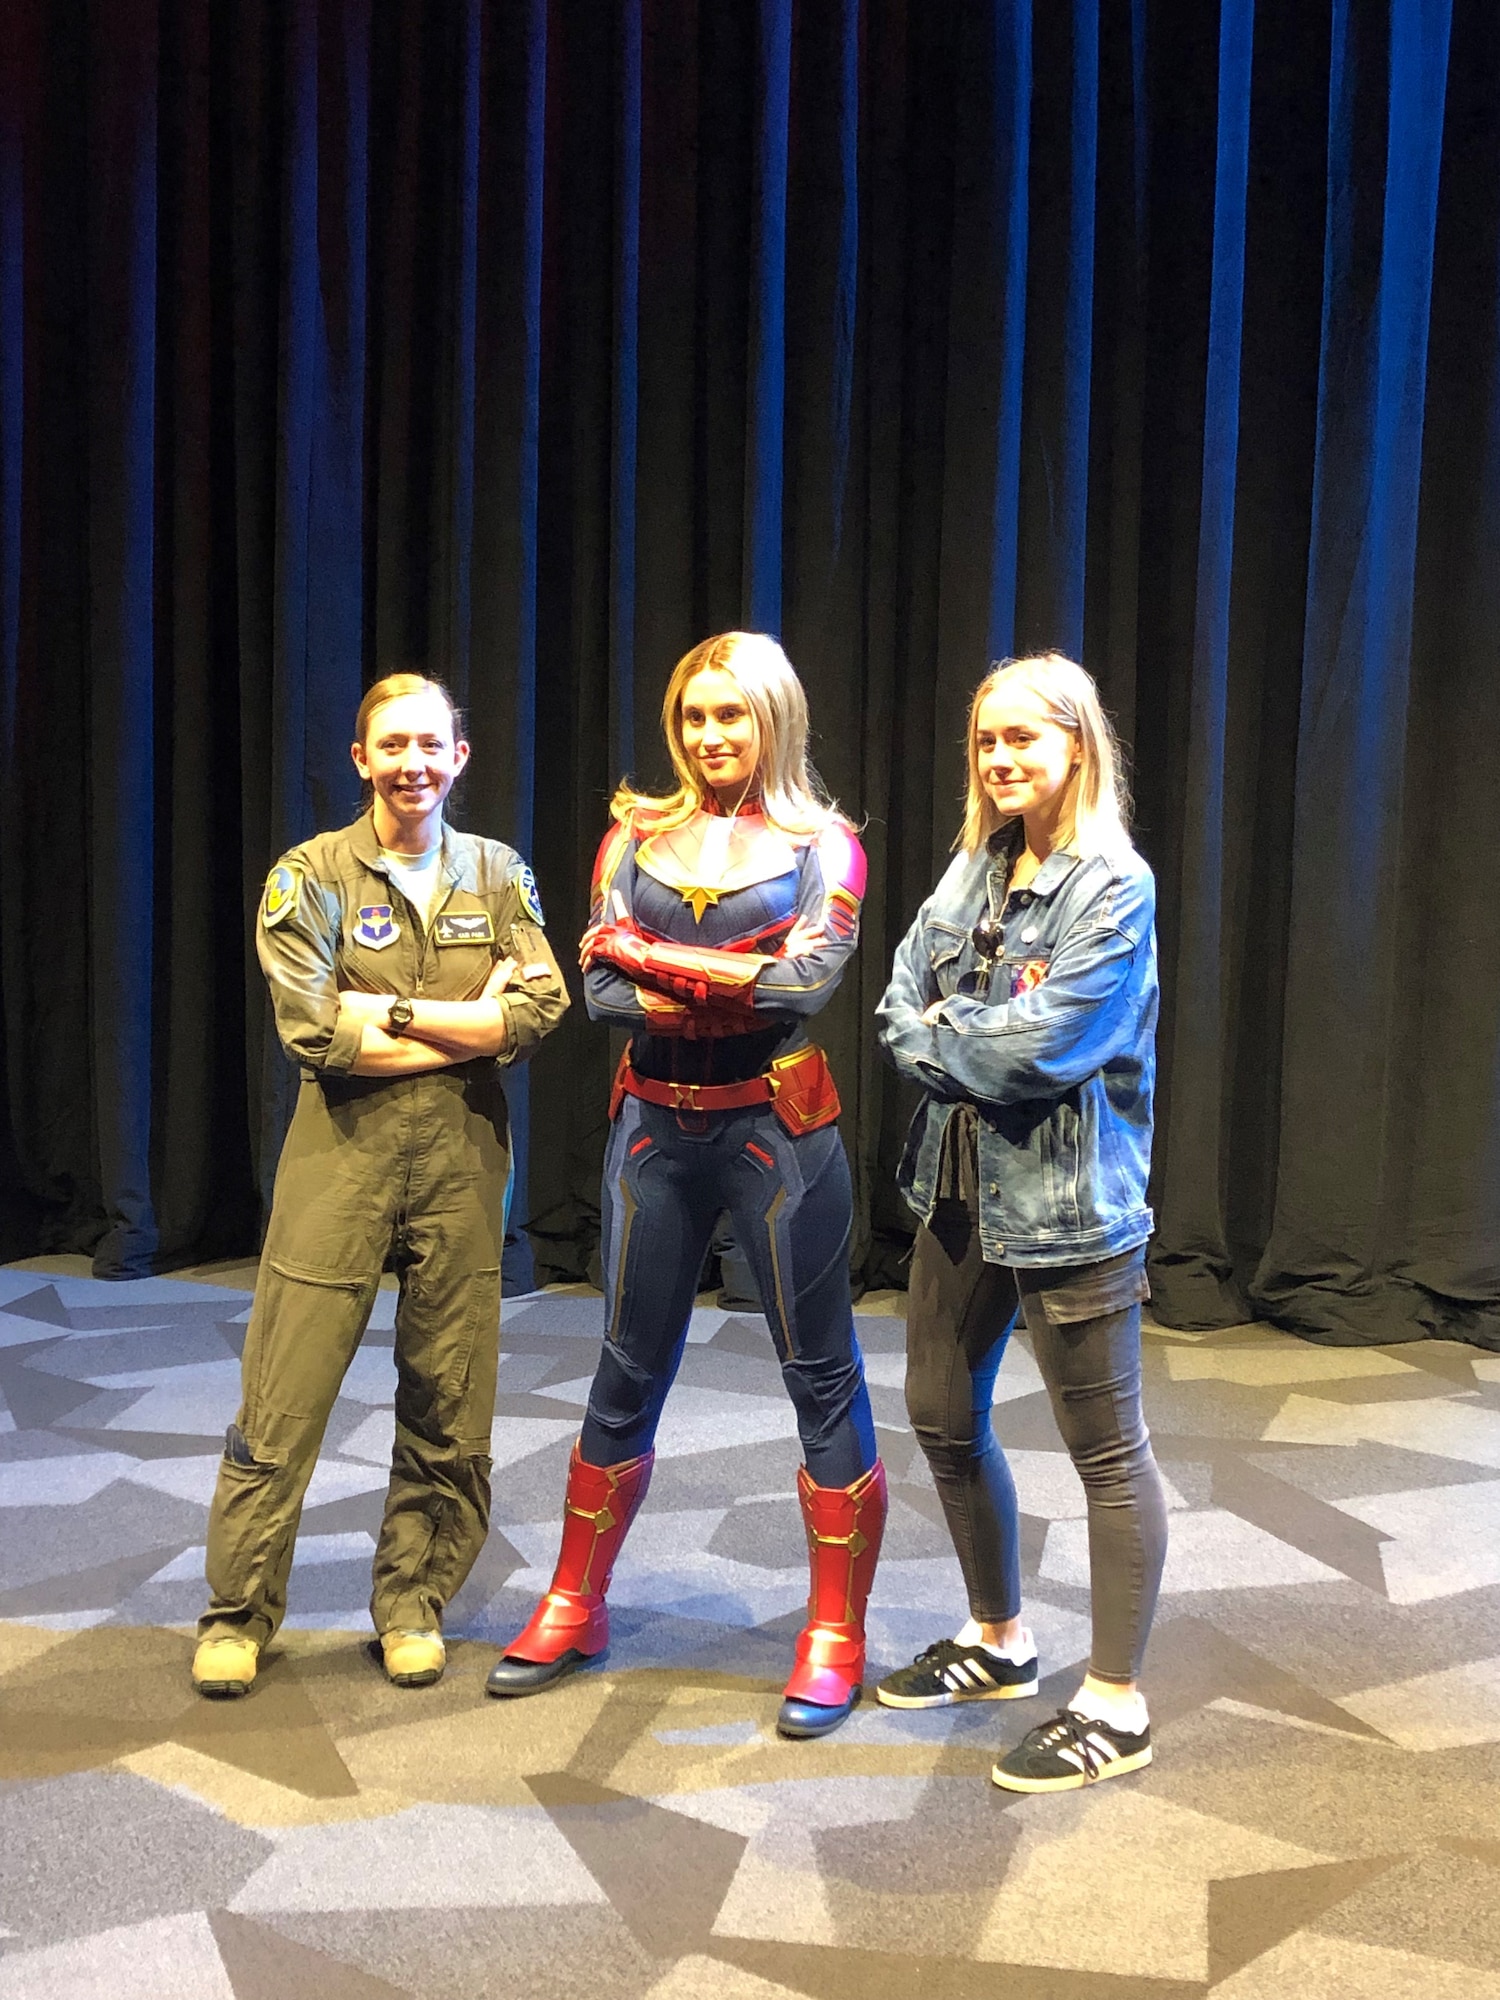 Capt. Danielle Park (left), 311th Fighter Squadron instructor pilot, poses with the Captain Marval Disney character impersonator in Los Angeles, Calif, March 4, 2019. Park was invited to attend the premiere of Captain Marval after giving the actress, Brie Larson, a ride in an F-16 Fighting Falcon while stationed at Nellis Air Force Base, Nev. (Courtesy photo)